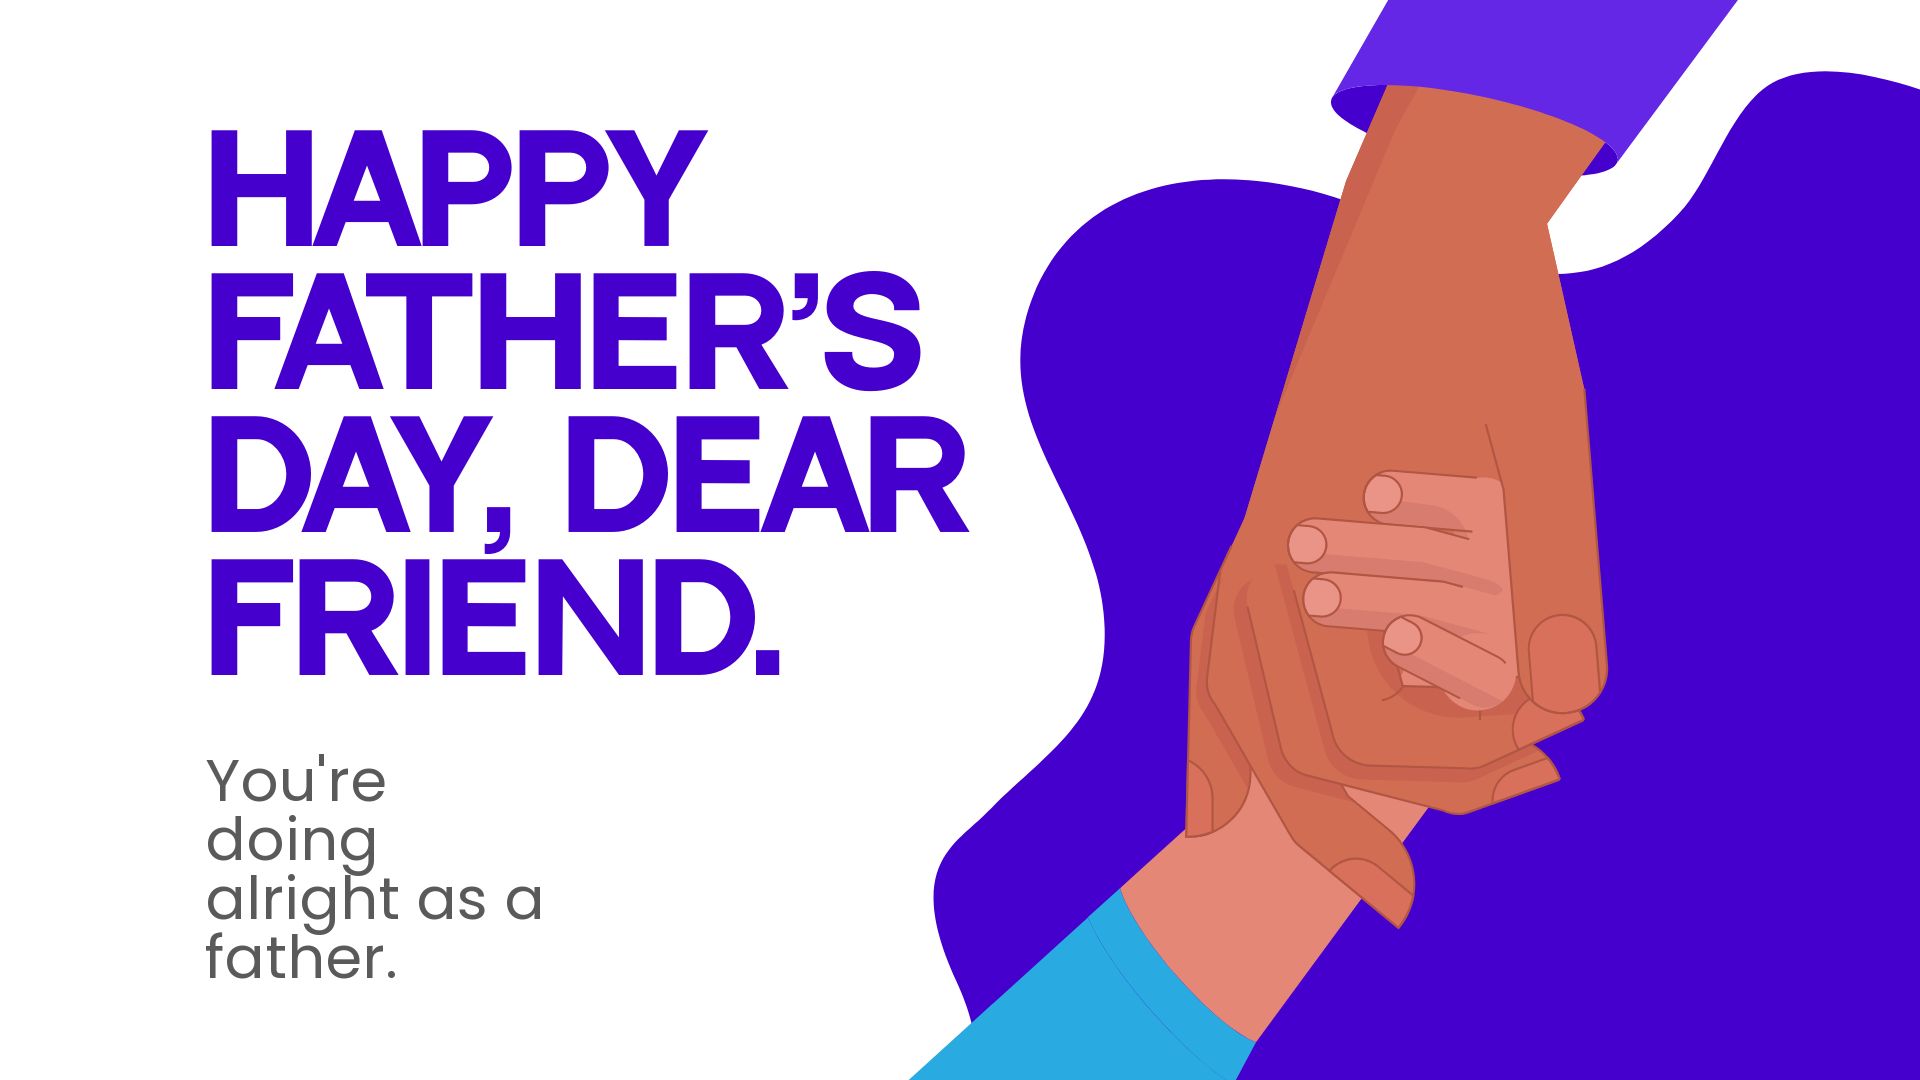 Free Happy Father's Day Friend Image